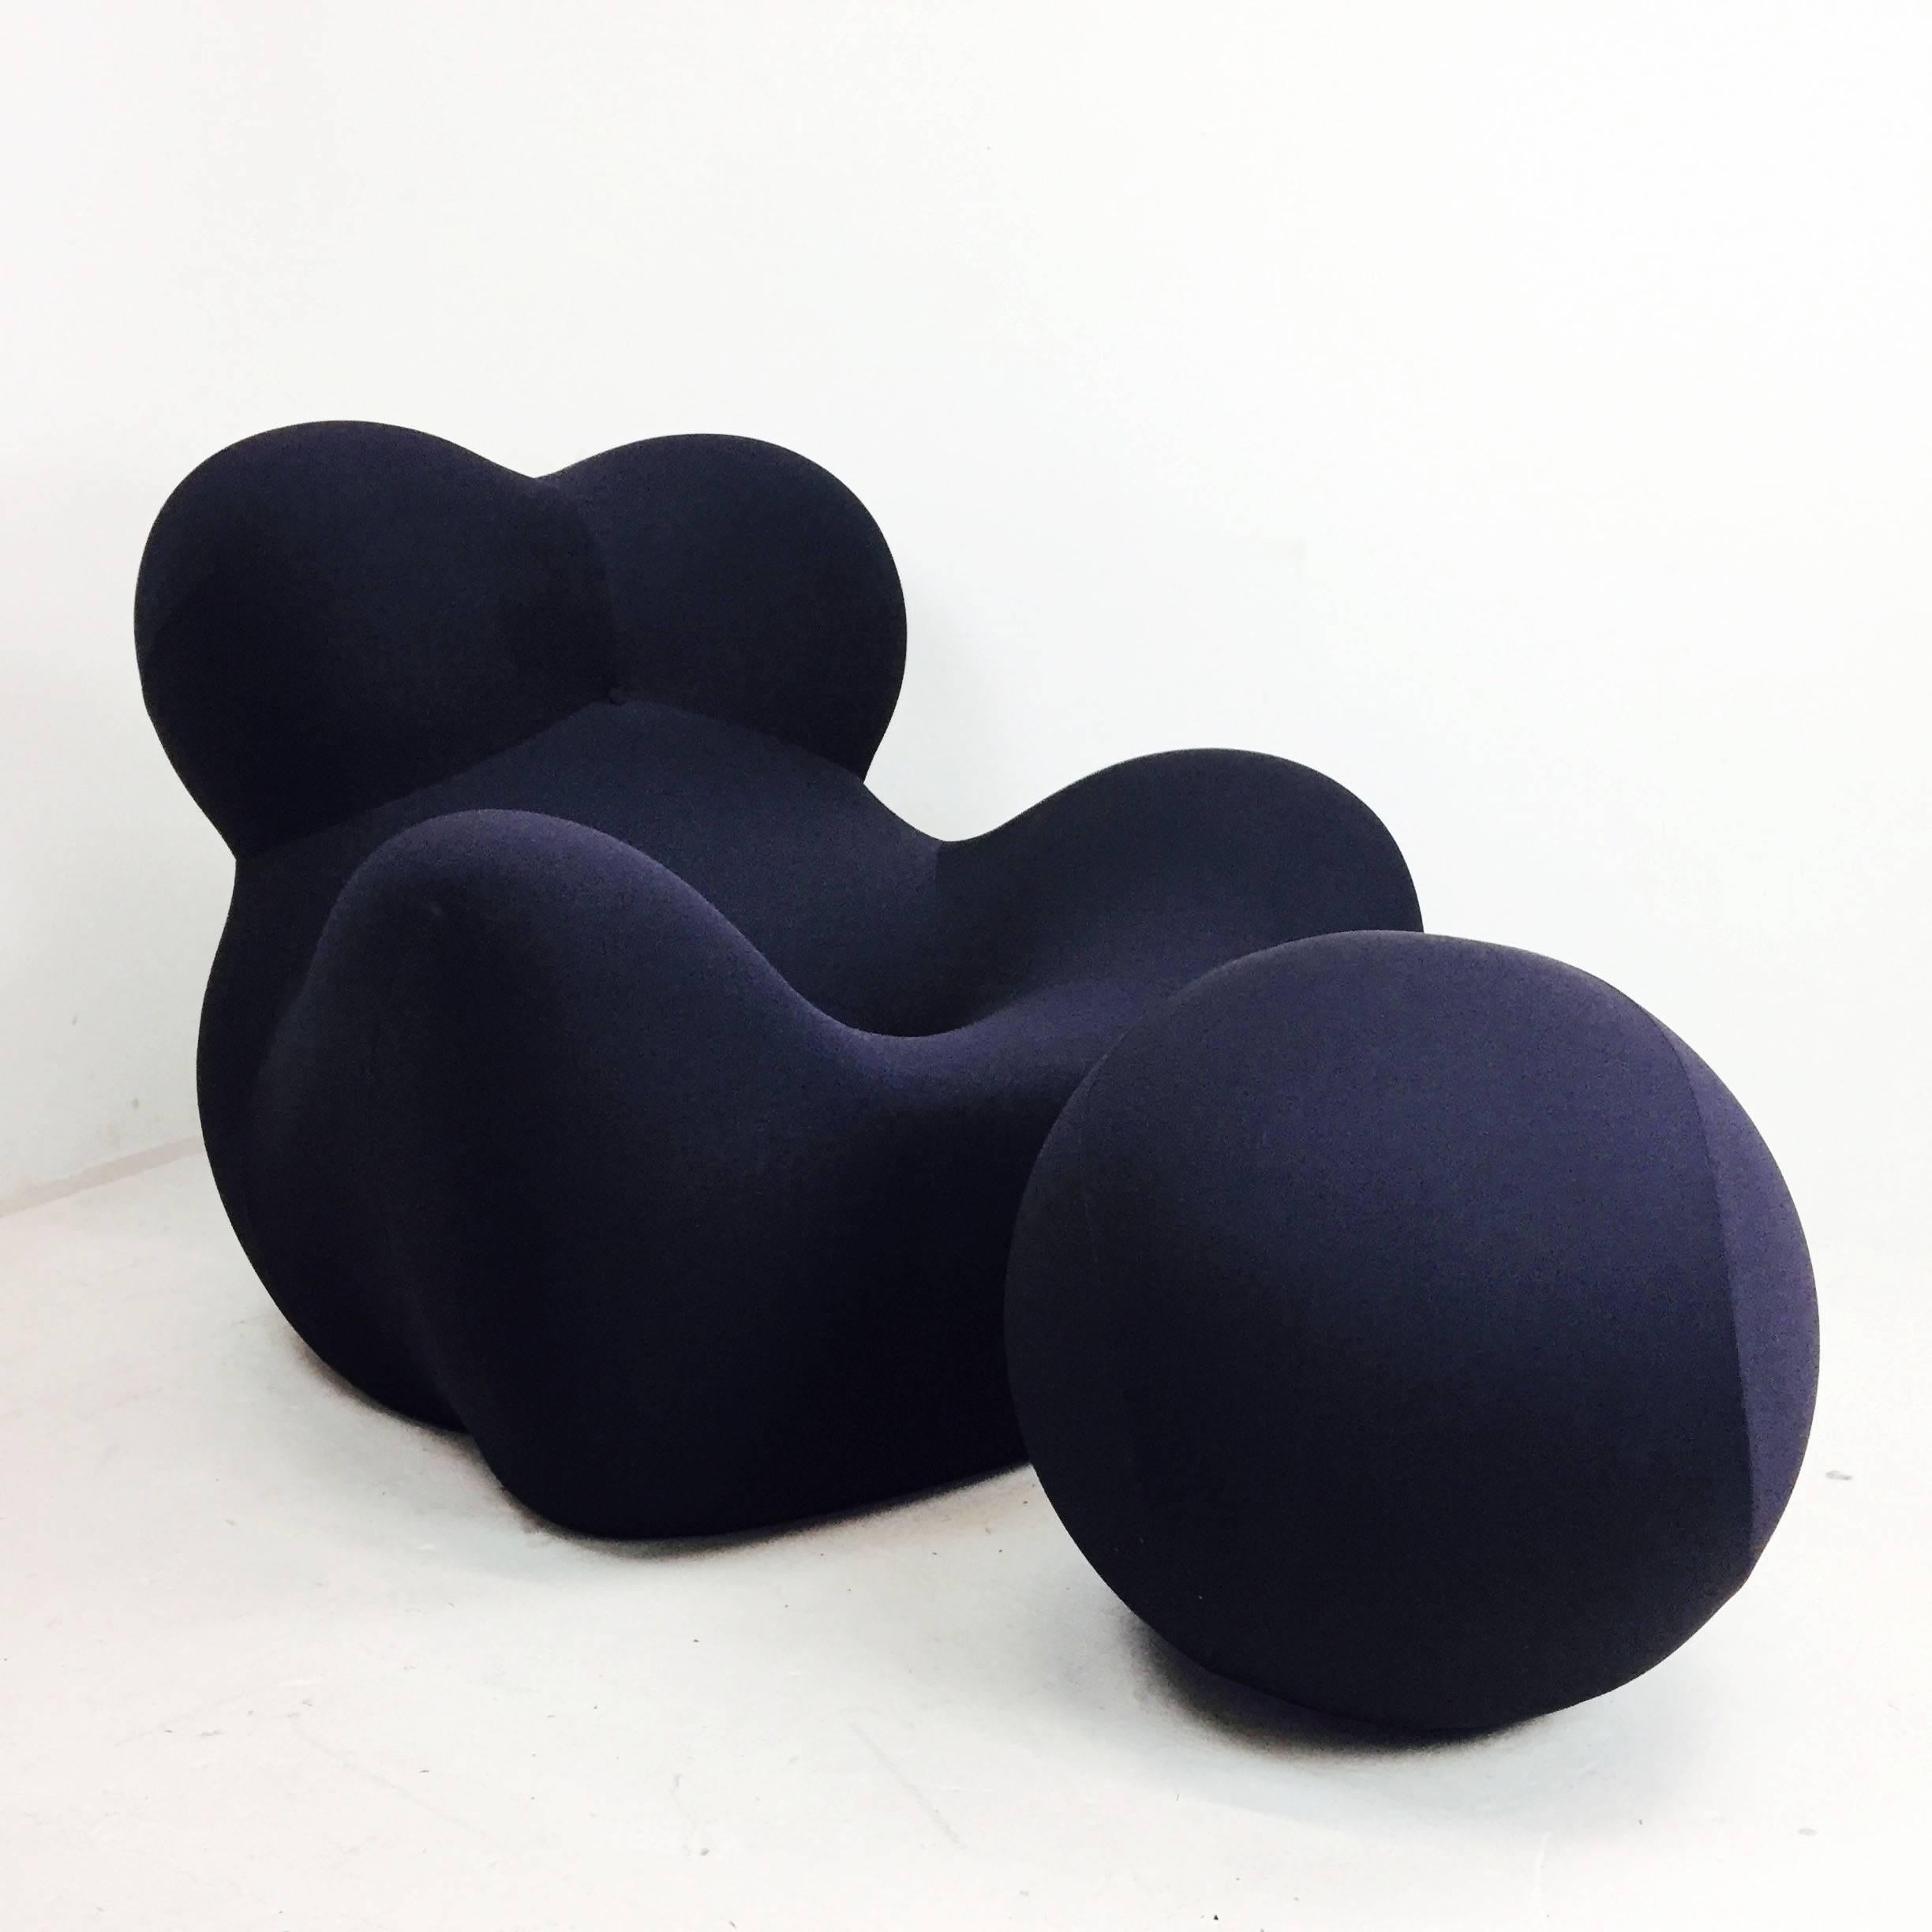 Gaetano Pesce Up 5 and 6 lounge chair and ottoman. The lounge chair is based off the woman’s form and the imprisonment of women with the symbolized ball and chain ottoman. The chair and ottoman are in good condition. Stretch knit fabric over foam